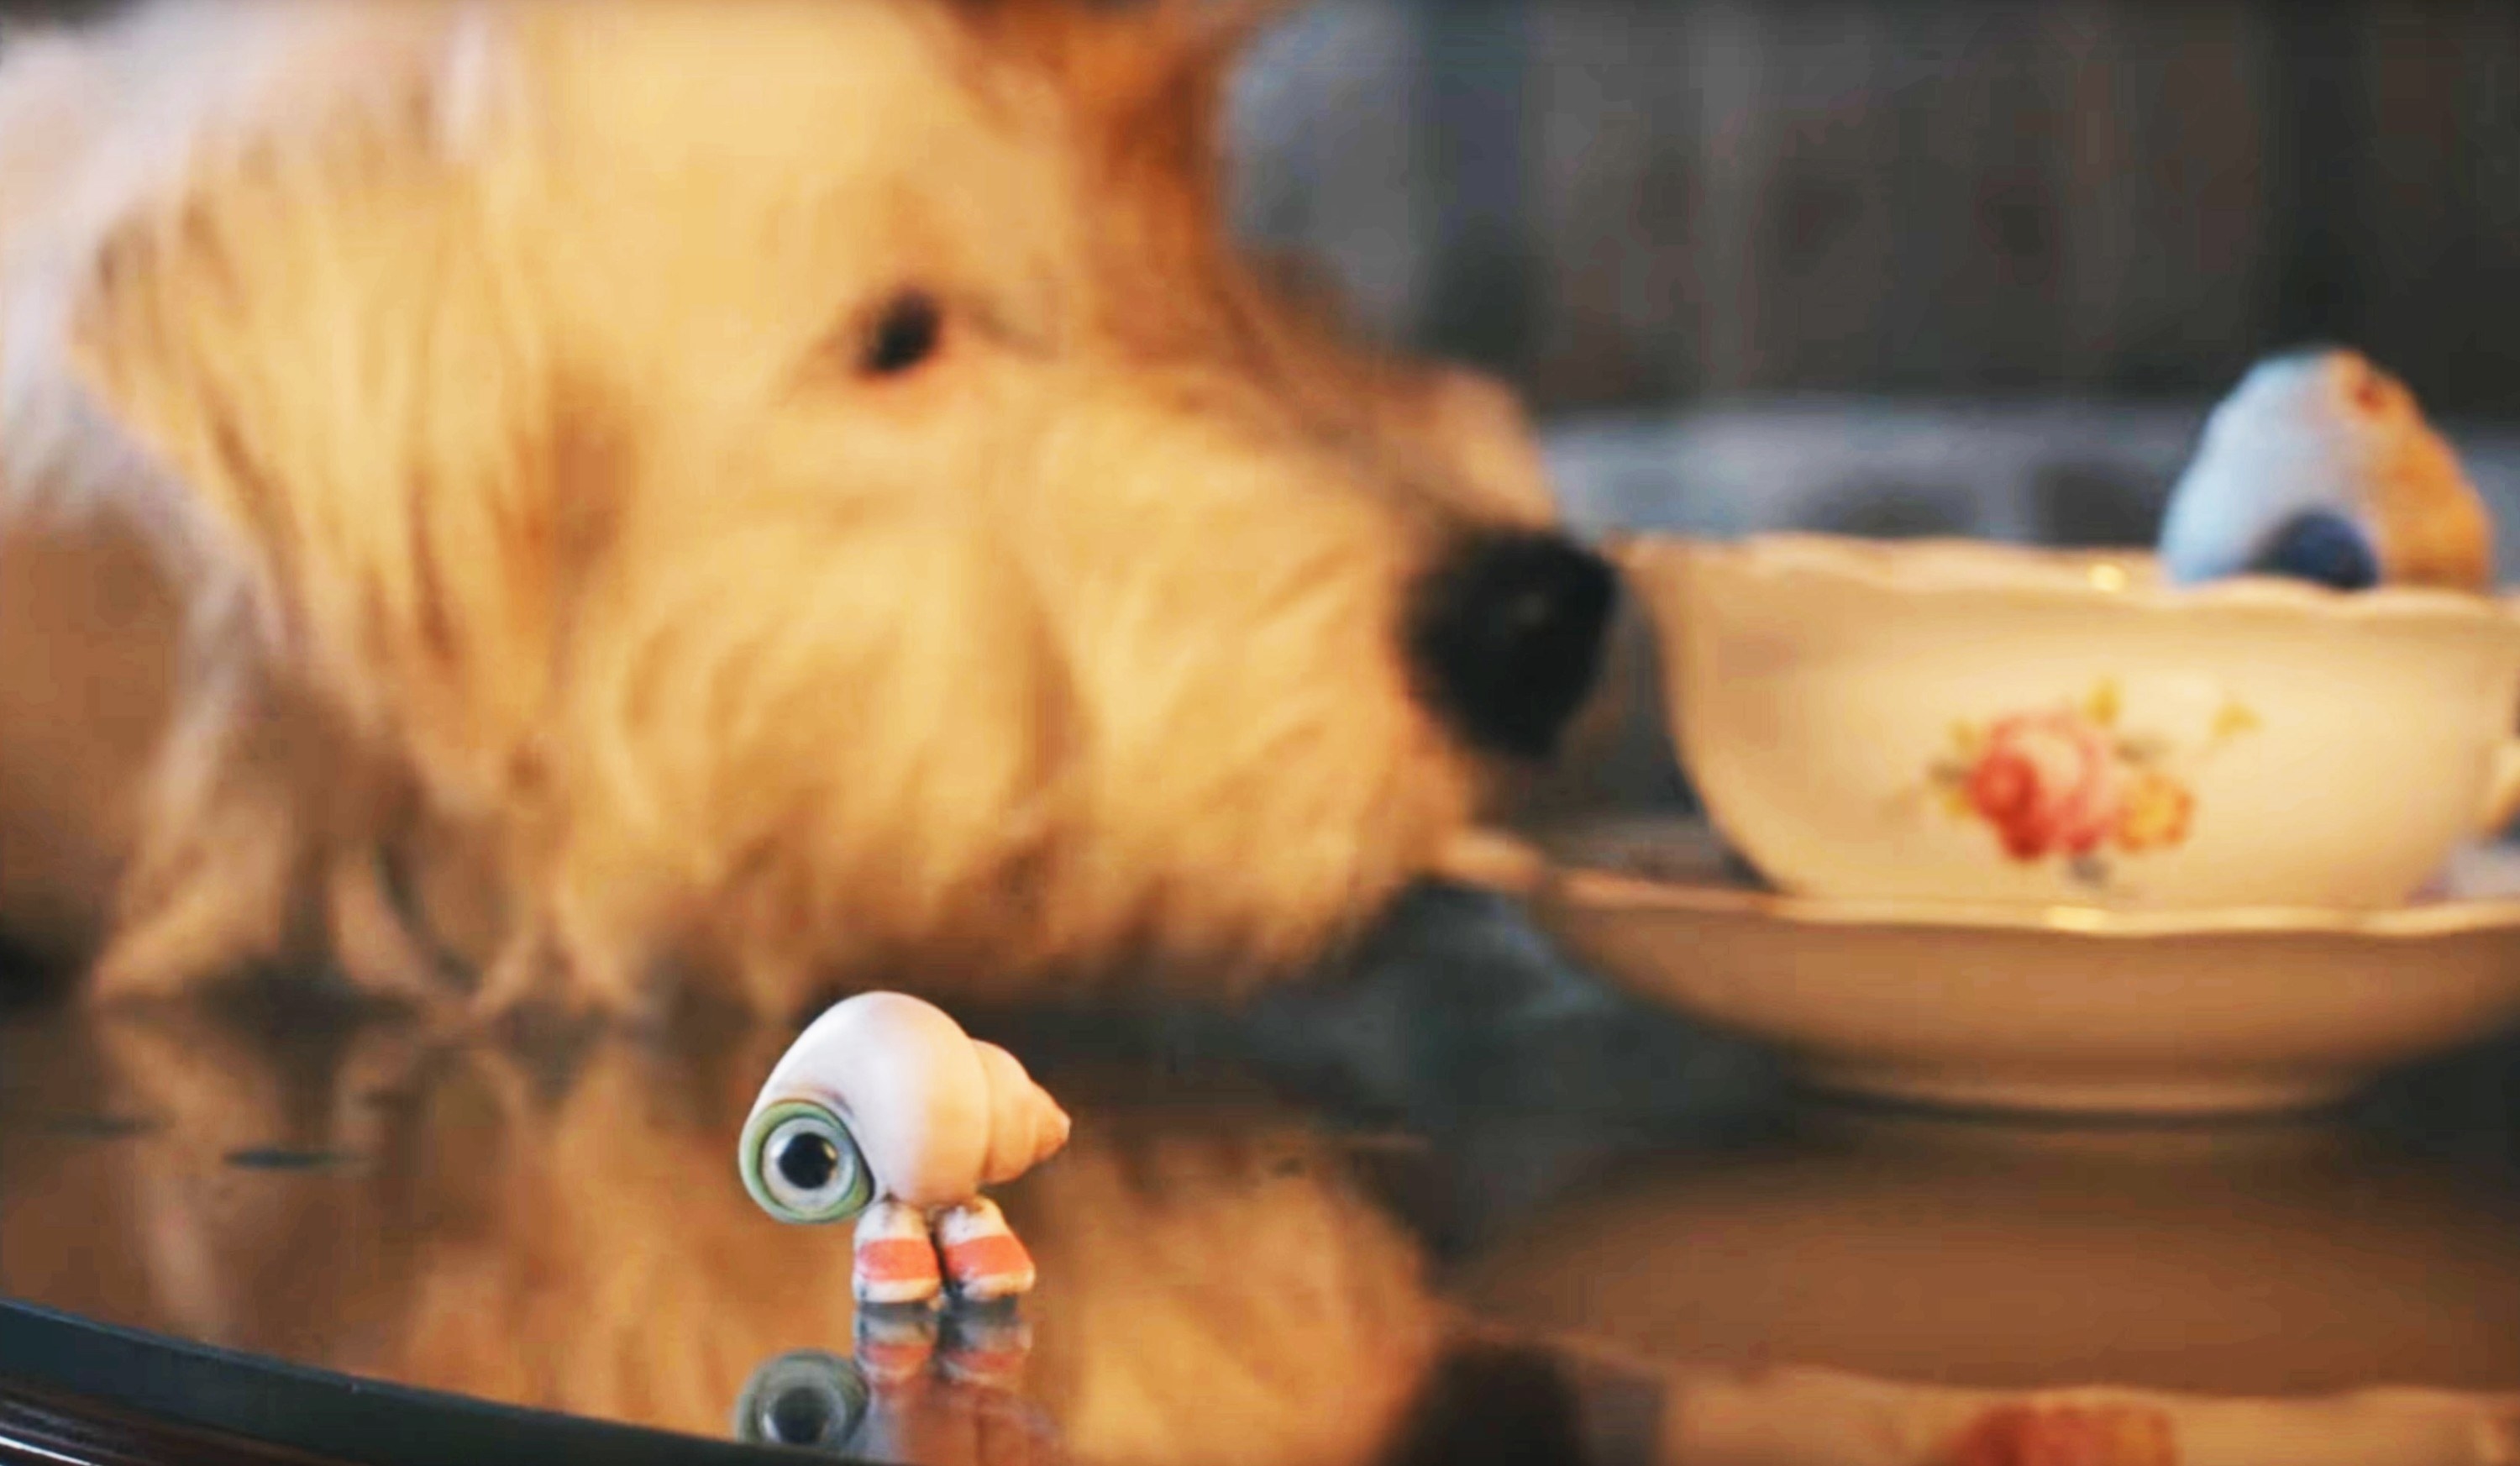 Marcel the shell stands on a table near a dog